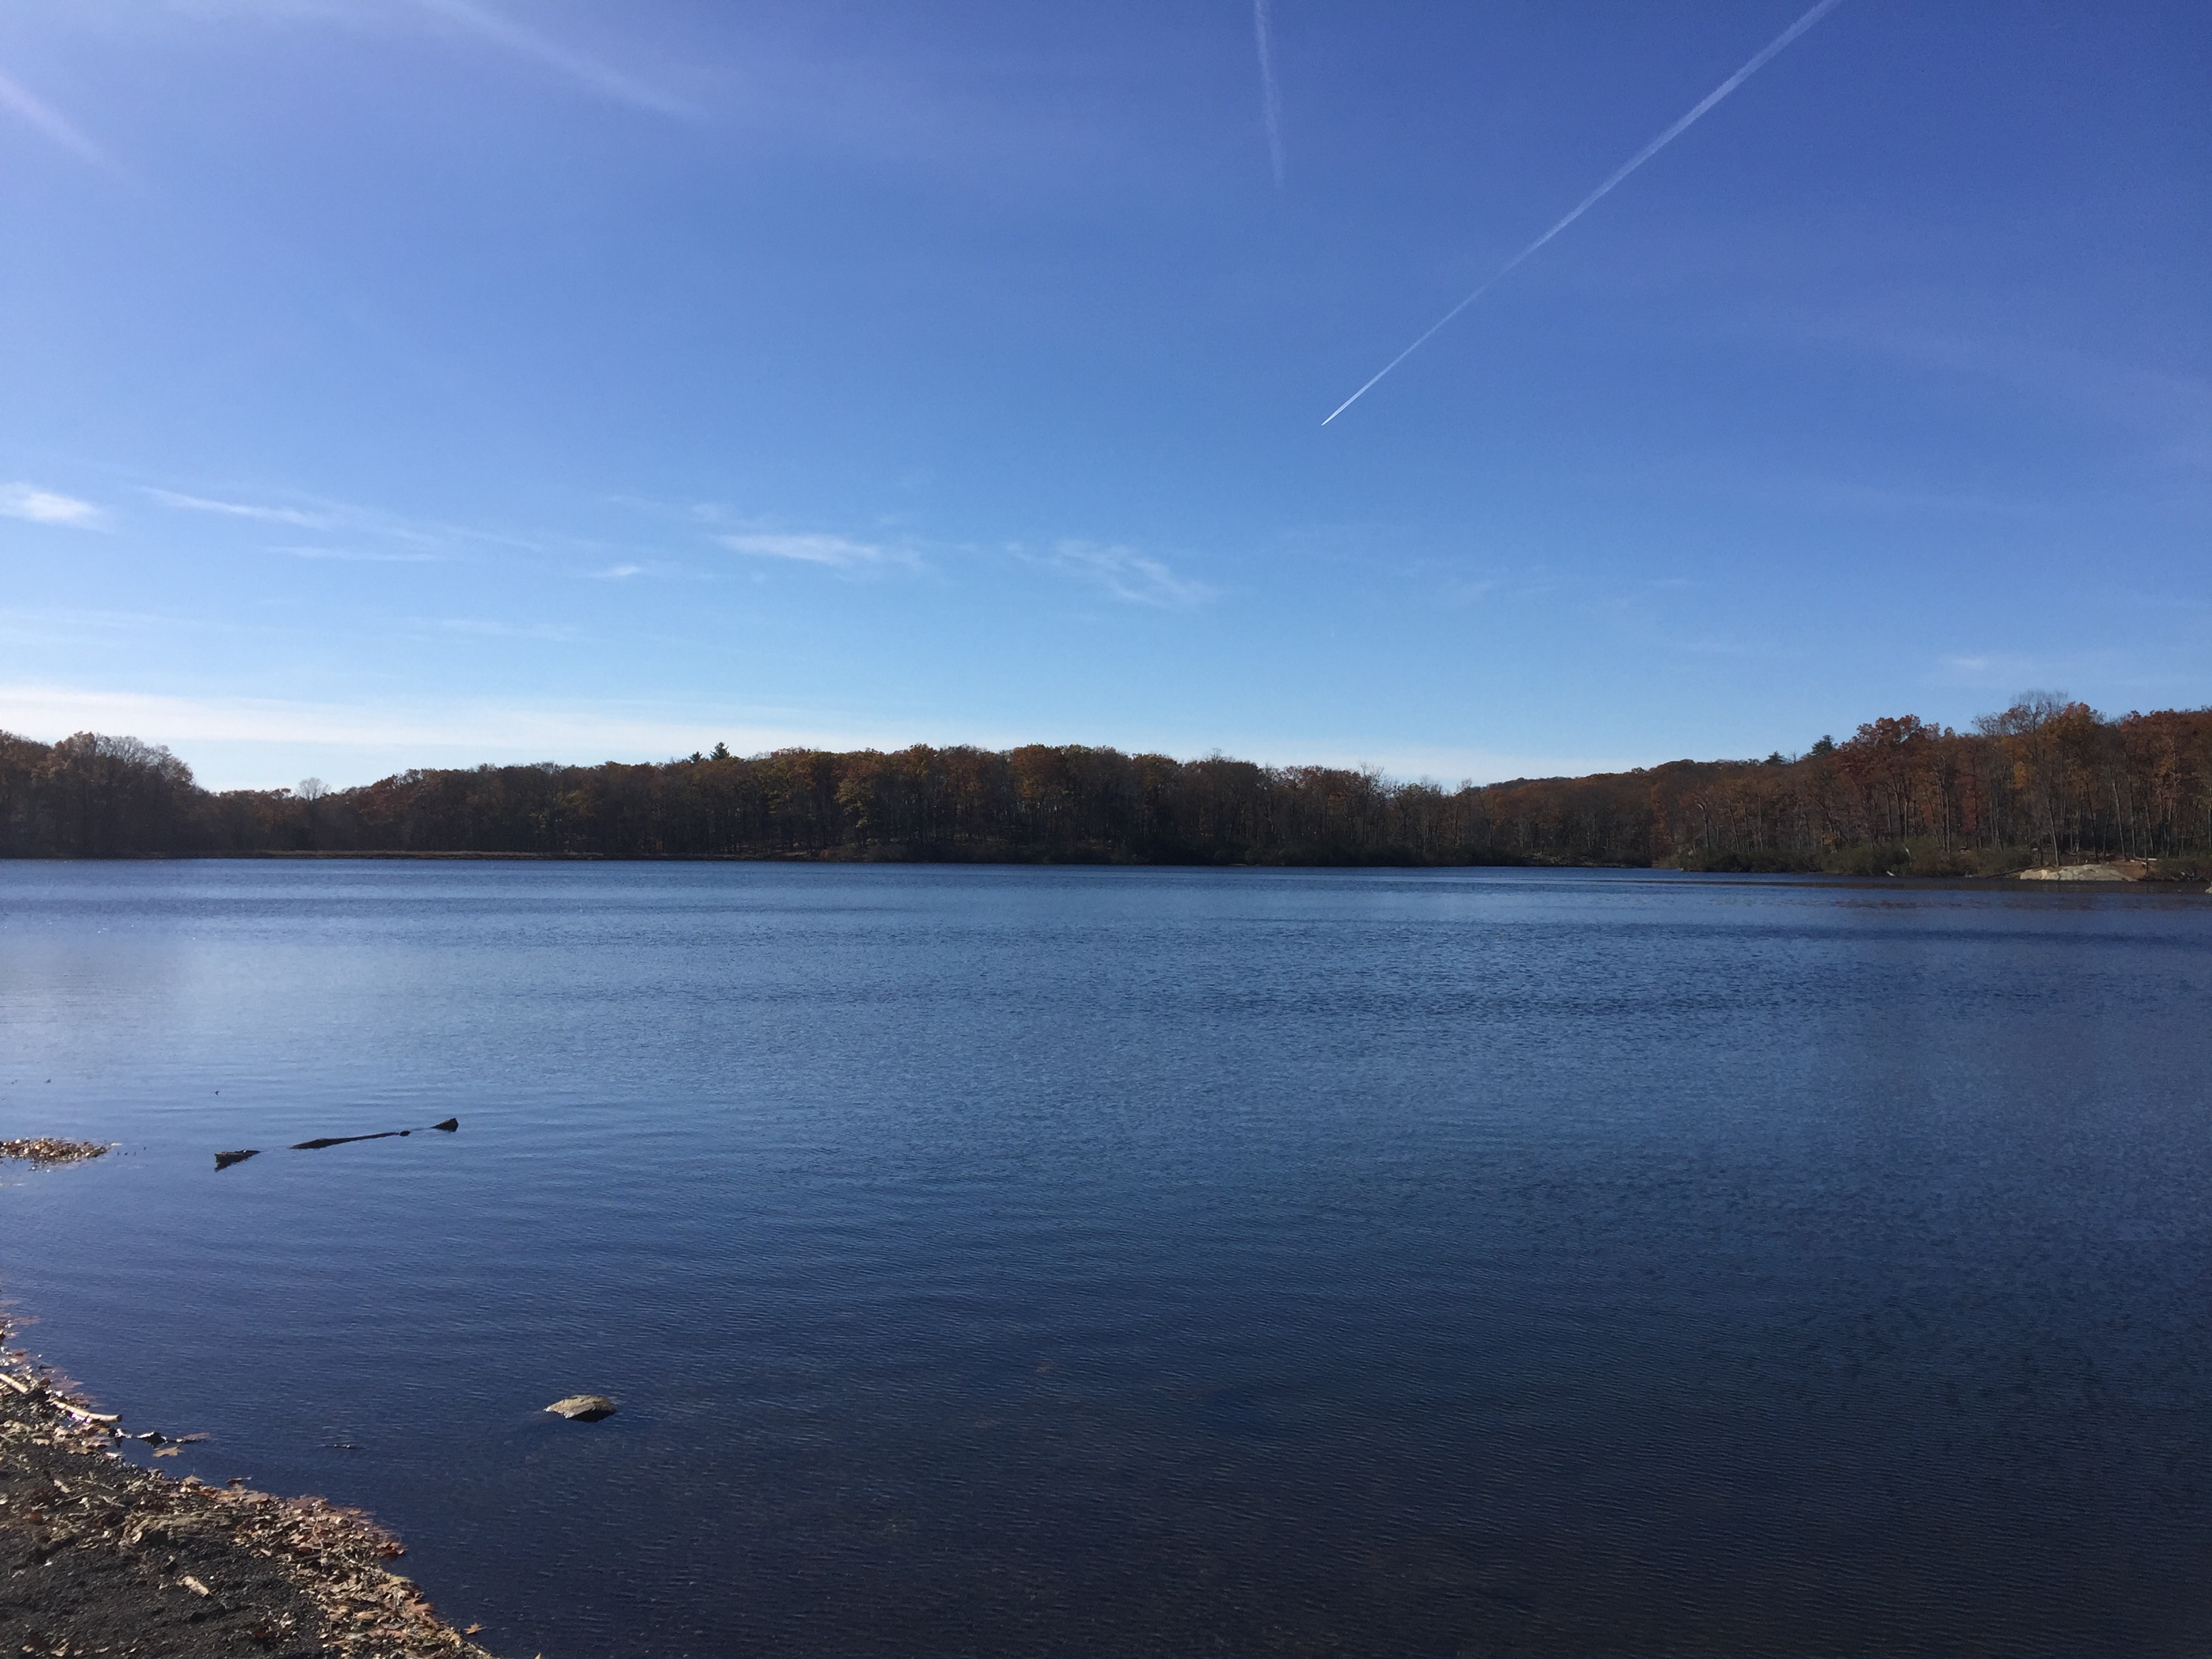 Hike with Haverstraw Mount Laurel Lake and Mine Viewing, Oh My